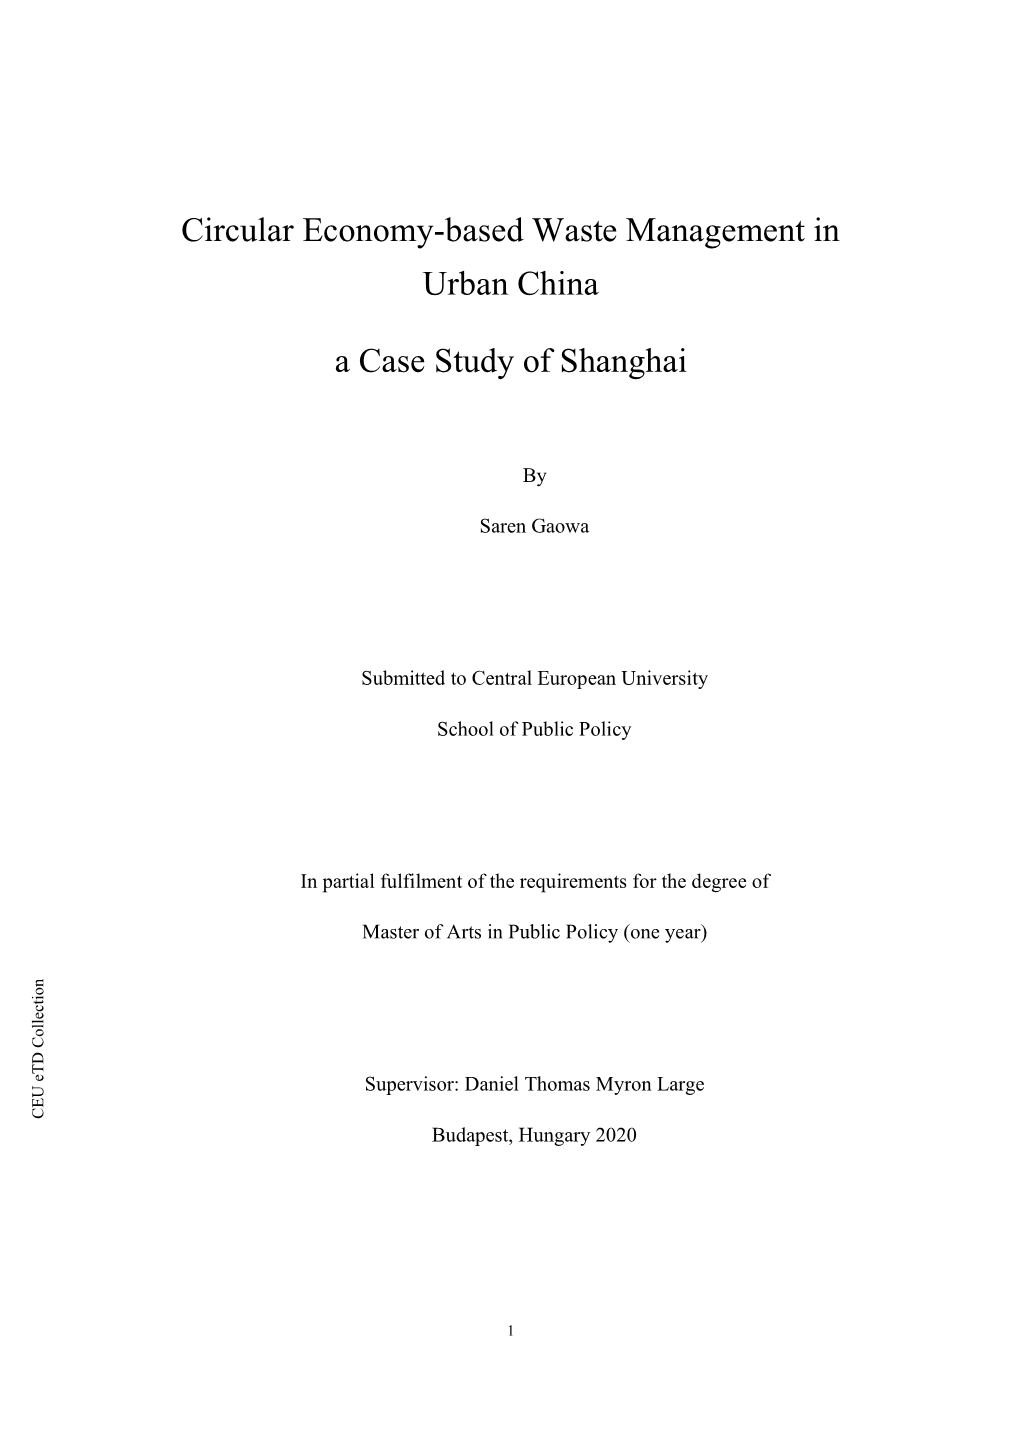 Circular Economy-Based Waste Management in Urban China A